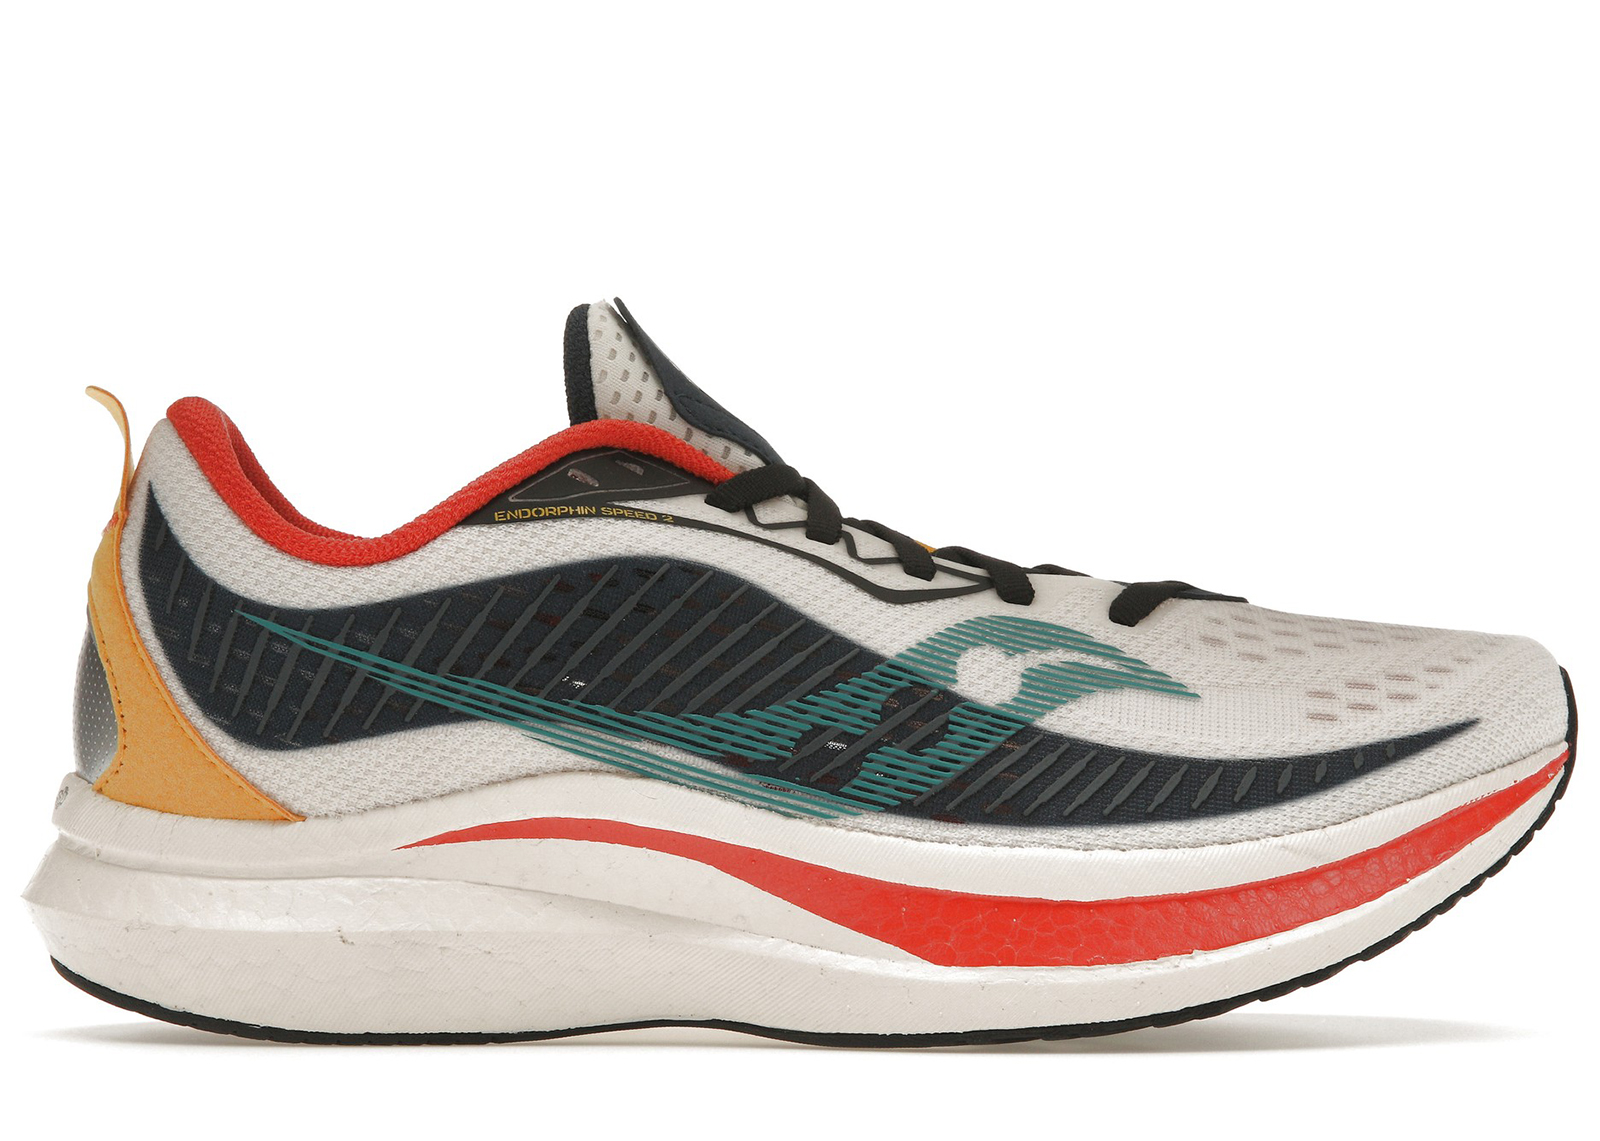 Saucony Endorphin Speed 2 Changing Tides Men's - S20688-50 - US